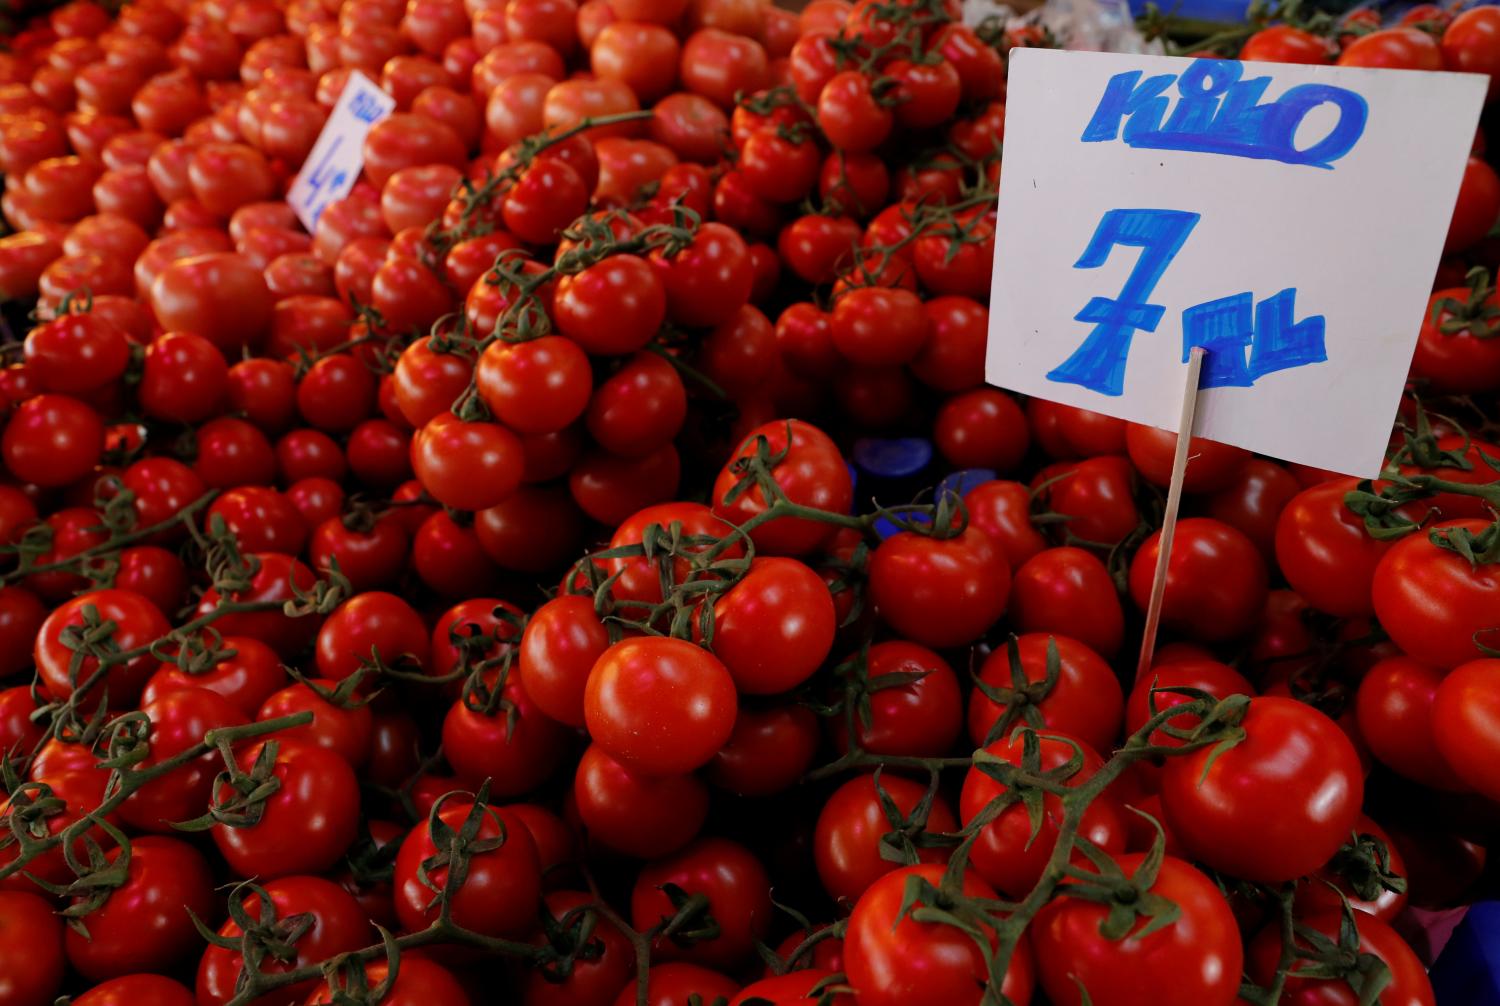 A card showing the price of tomatoes is seen at a food market in Istanbul, Turkey, February 11, 2019. REUTERS/Murad Sezer - RC13CDFC8430